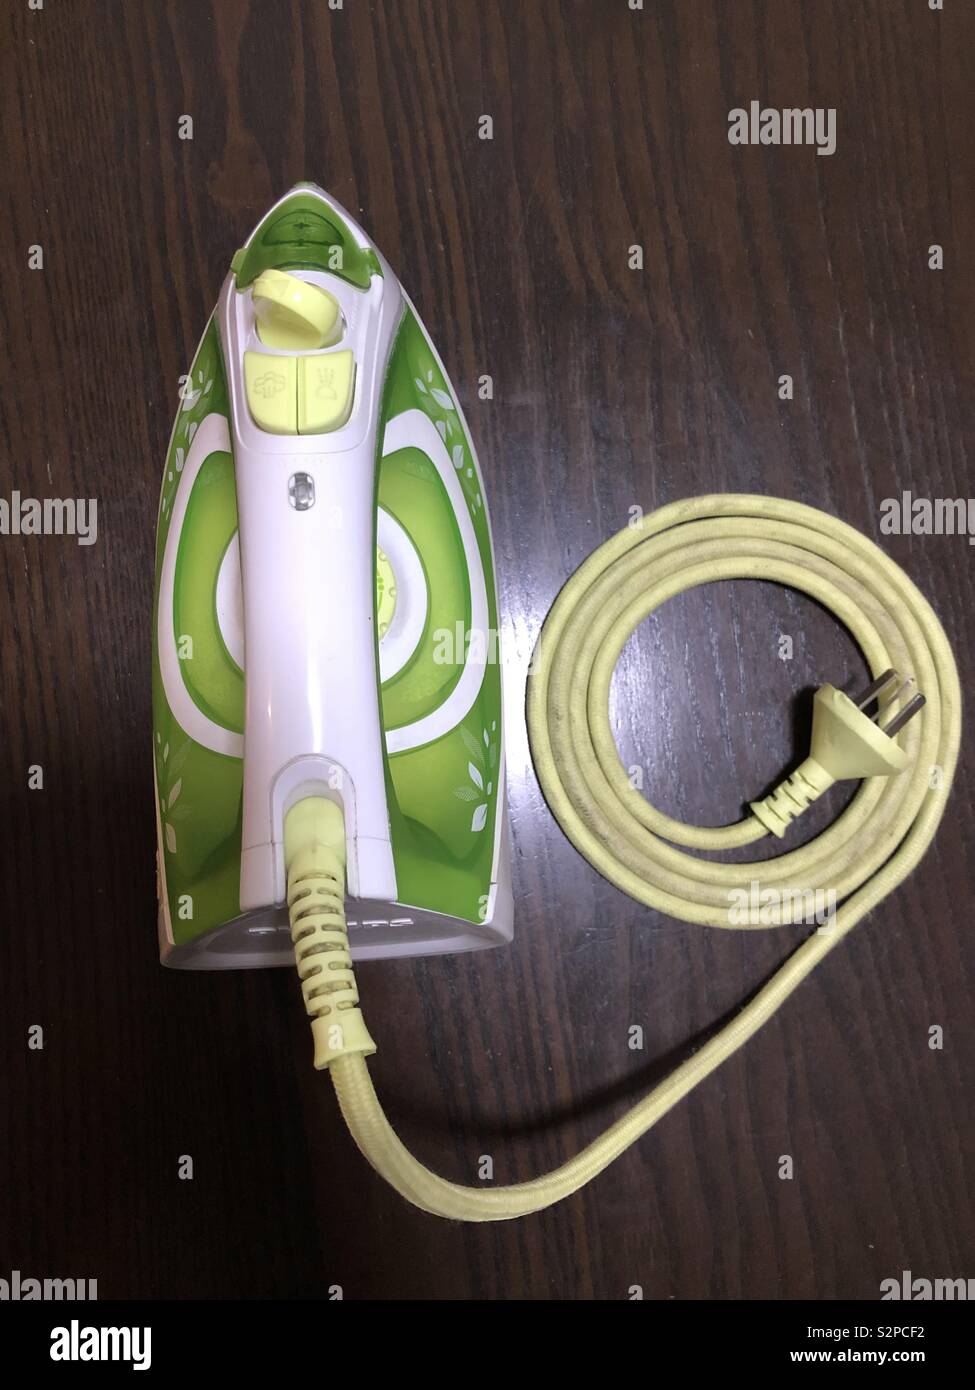 Green and white iron flat on the surface with coiled cable beside it and Asian plug in the middle of the coil. Stock Photo